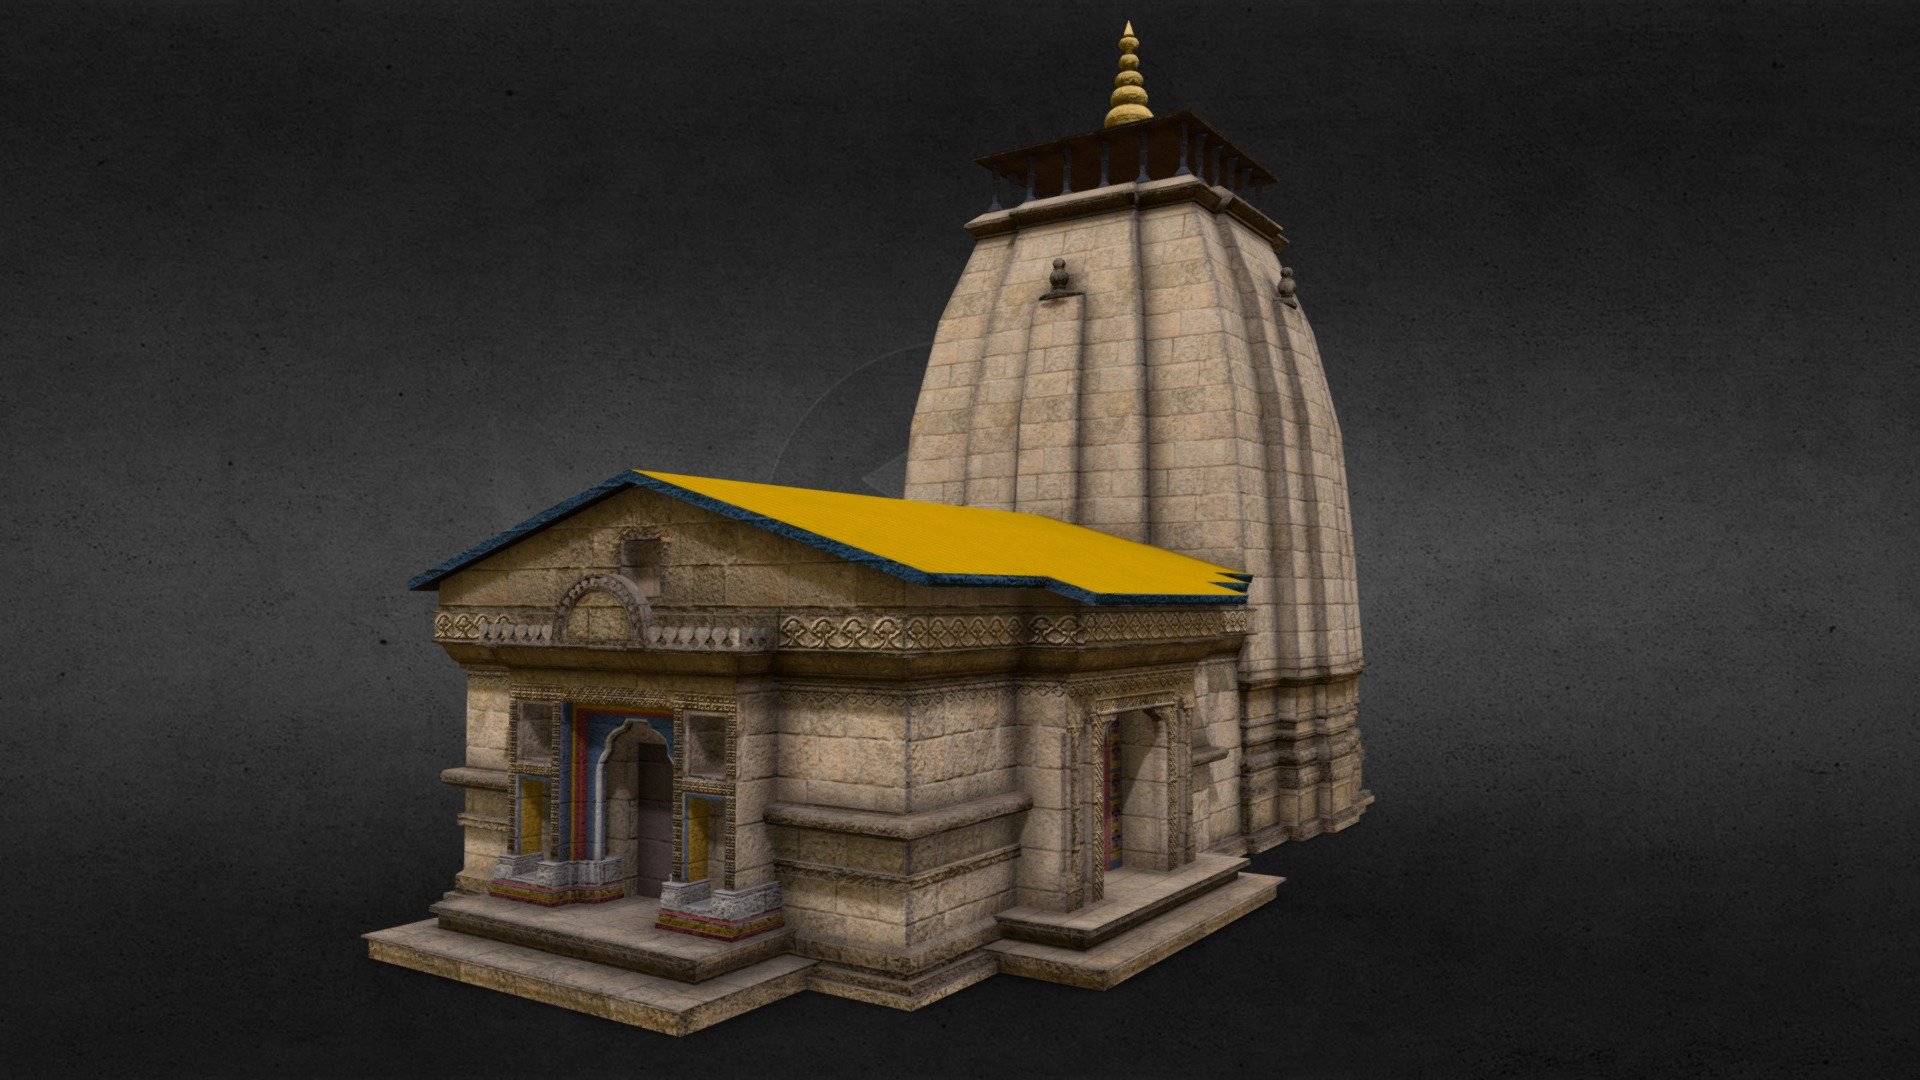 This is kedarnath temple in India. This model is game ready and has 8096x8096 textures. let me know what you think - Kedarnath Temple - 3D model by AgniStudios 3d model